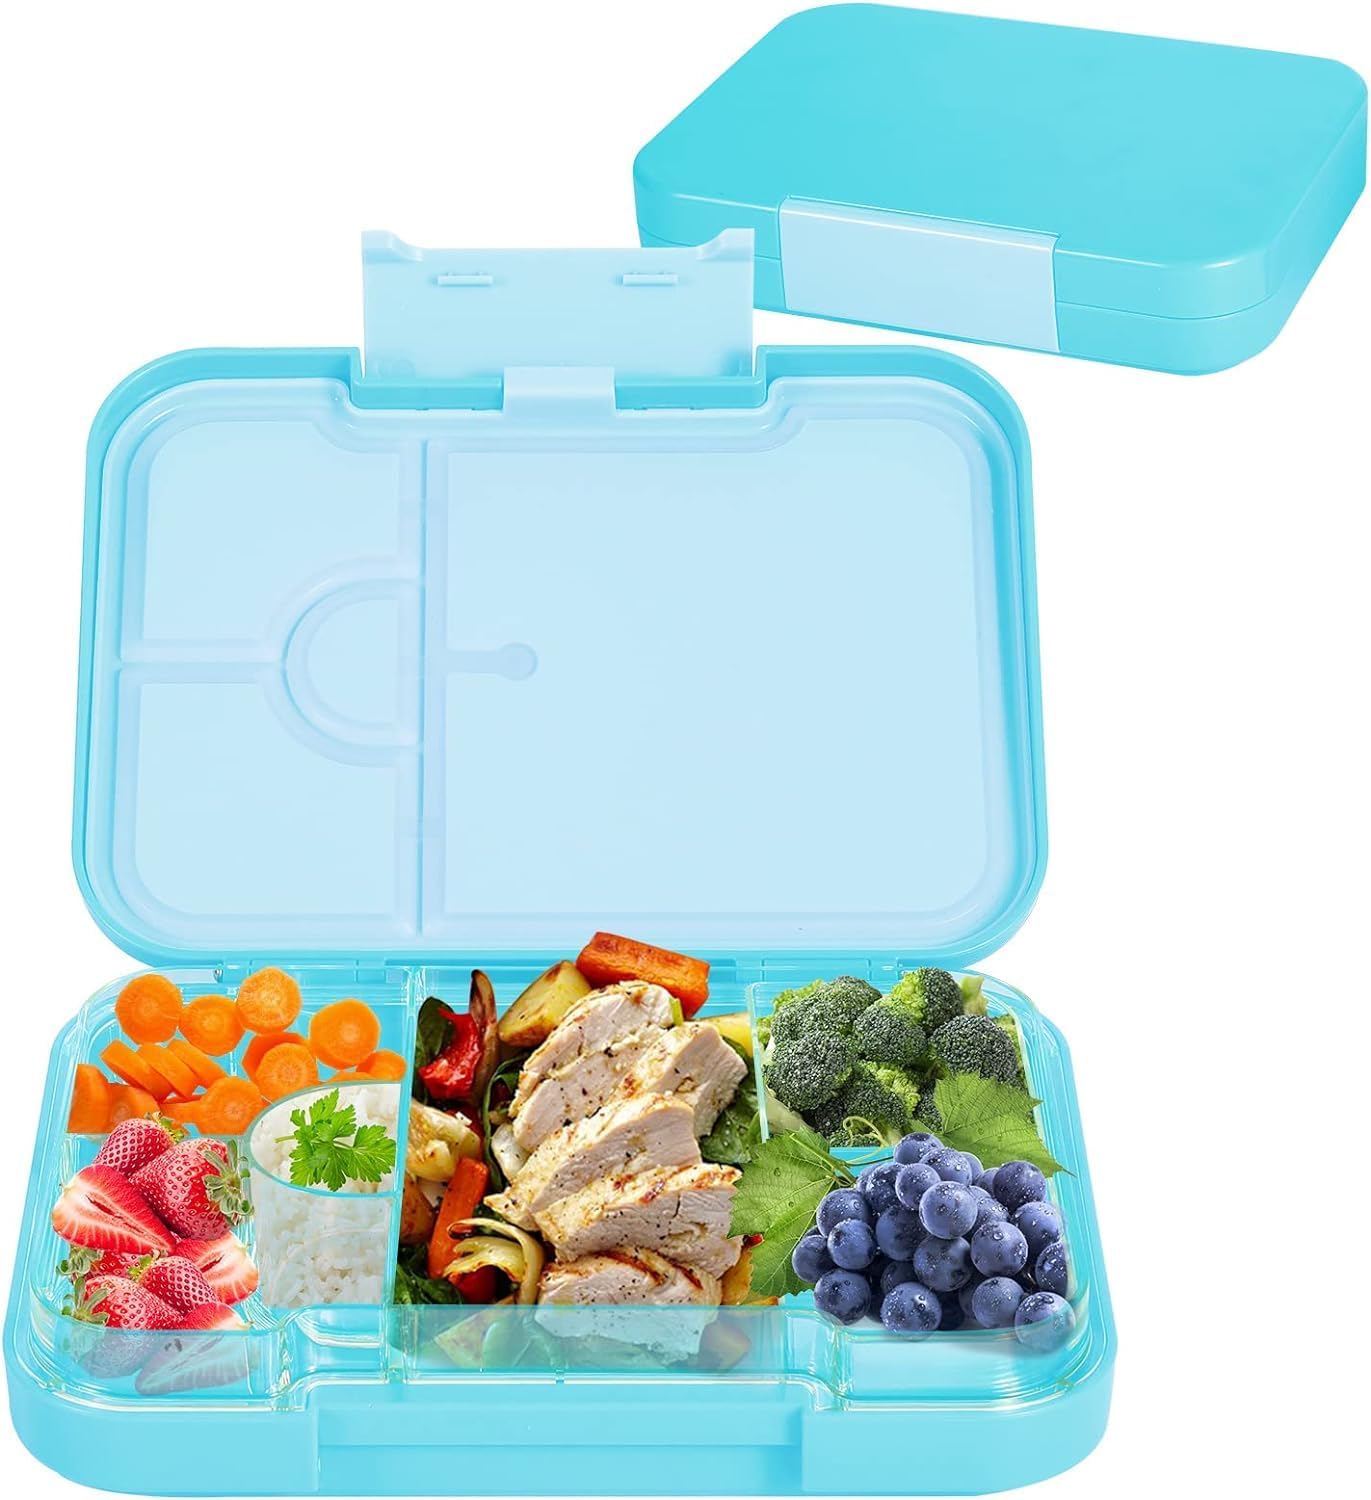 Bento Box, 6 Compartments Ideal Portion Size Leak-Proof, Toddler-Friendly Lunch Box, BPA-Free, Dishwasher safe, Lunch Box for kids Aged 3 to 7 Years (Sky Blue)